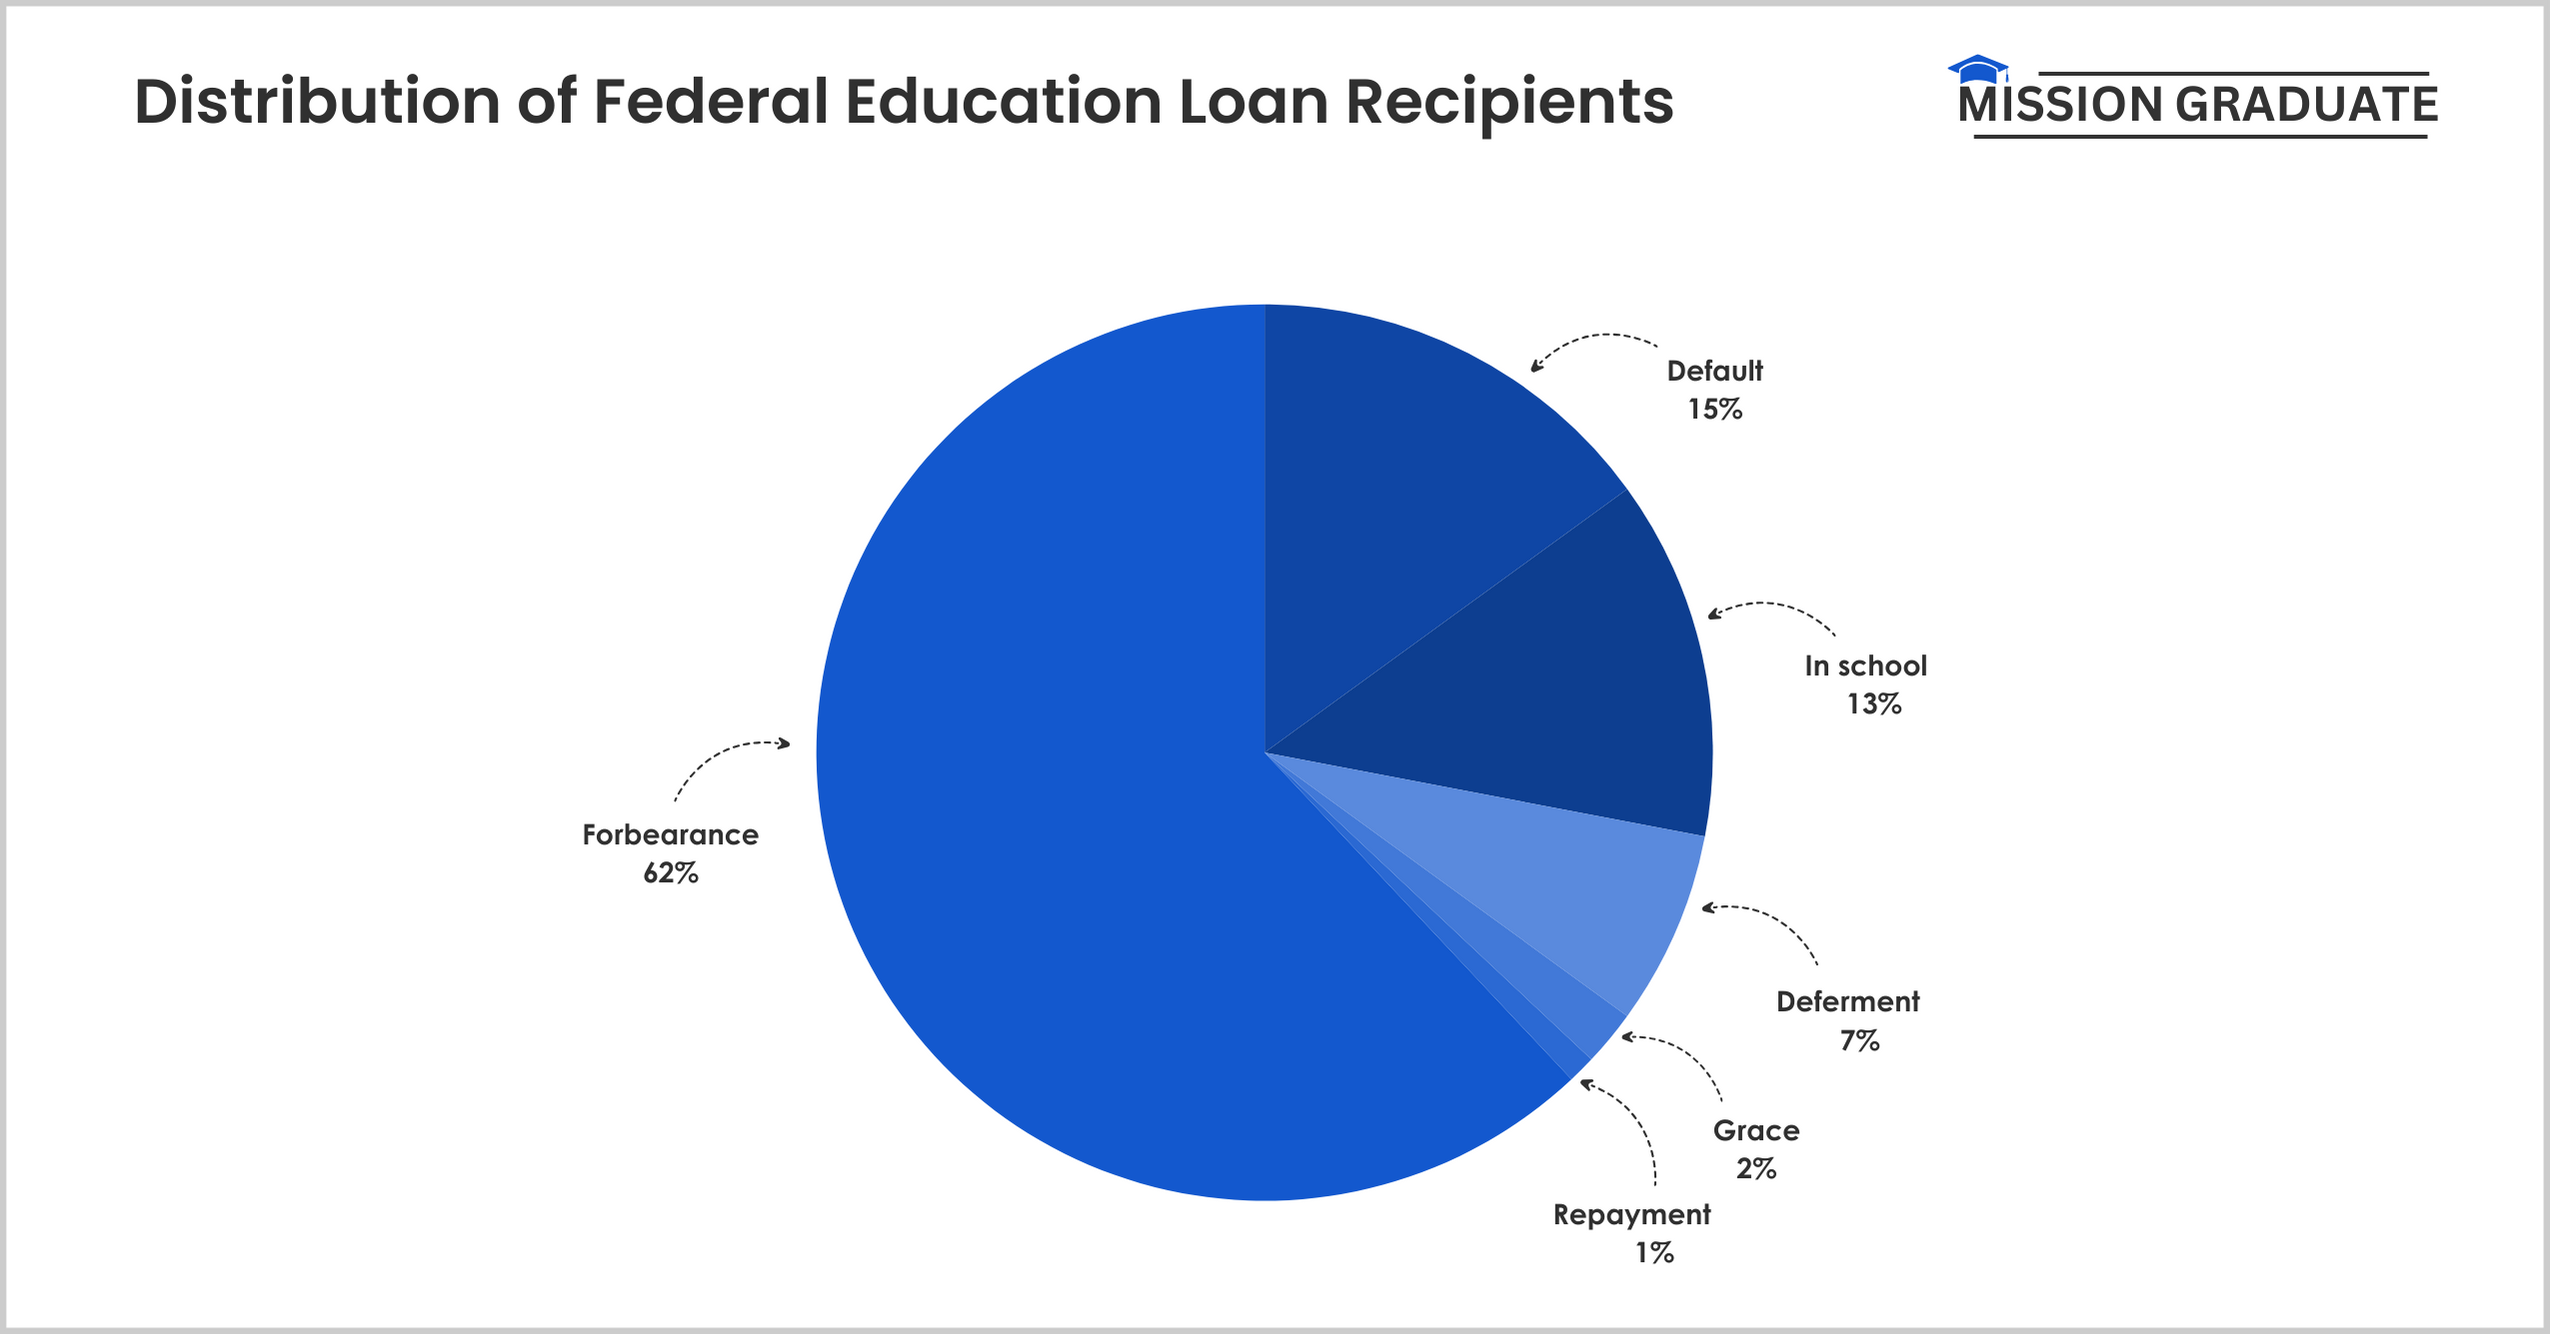 Distribution of Federal Education Loan Recipients